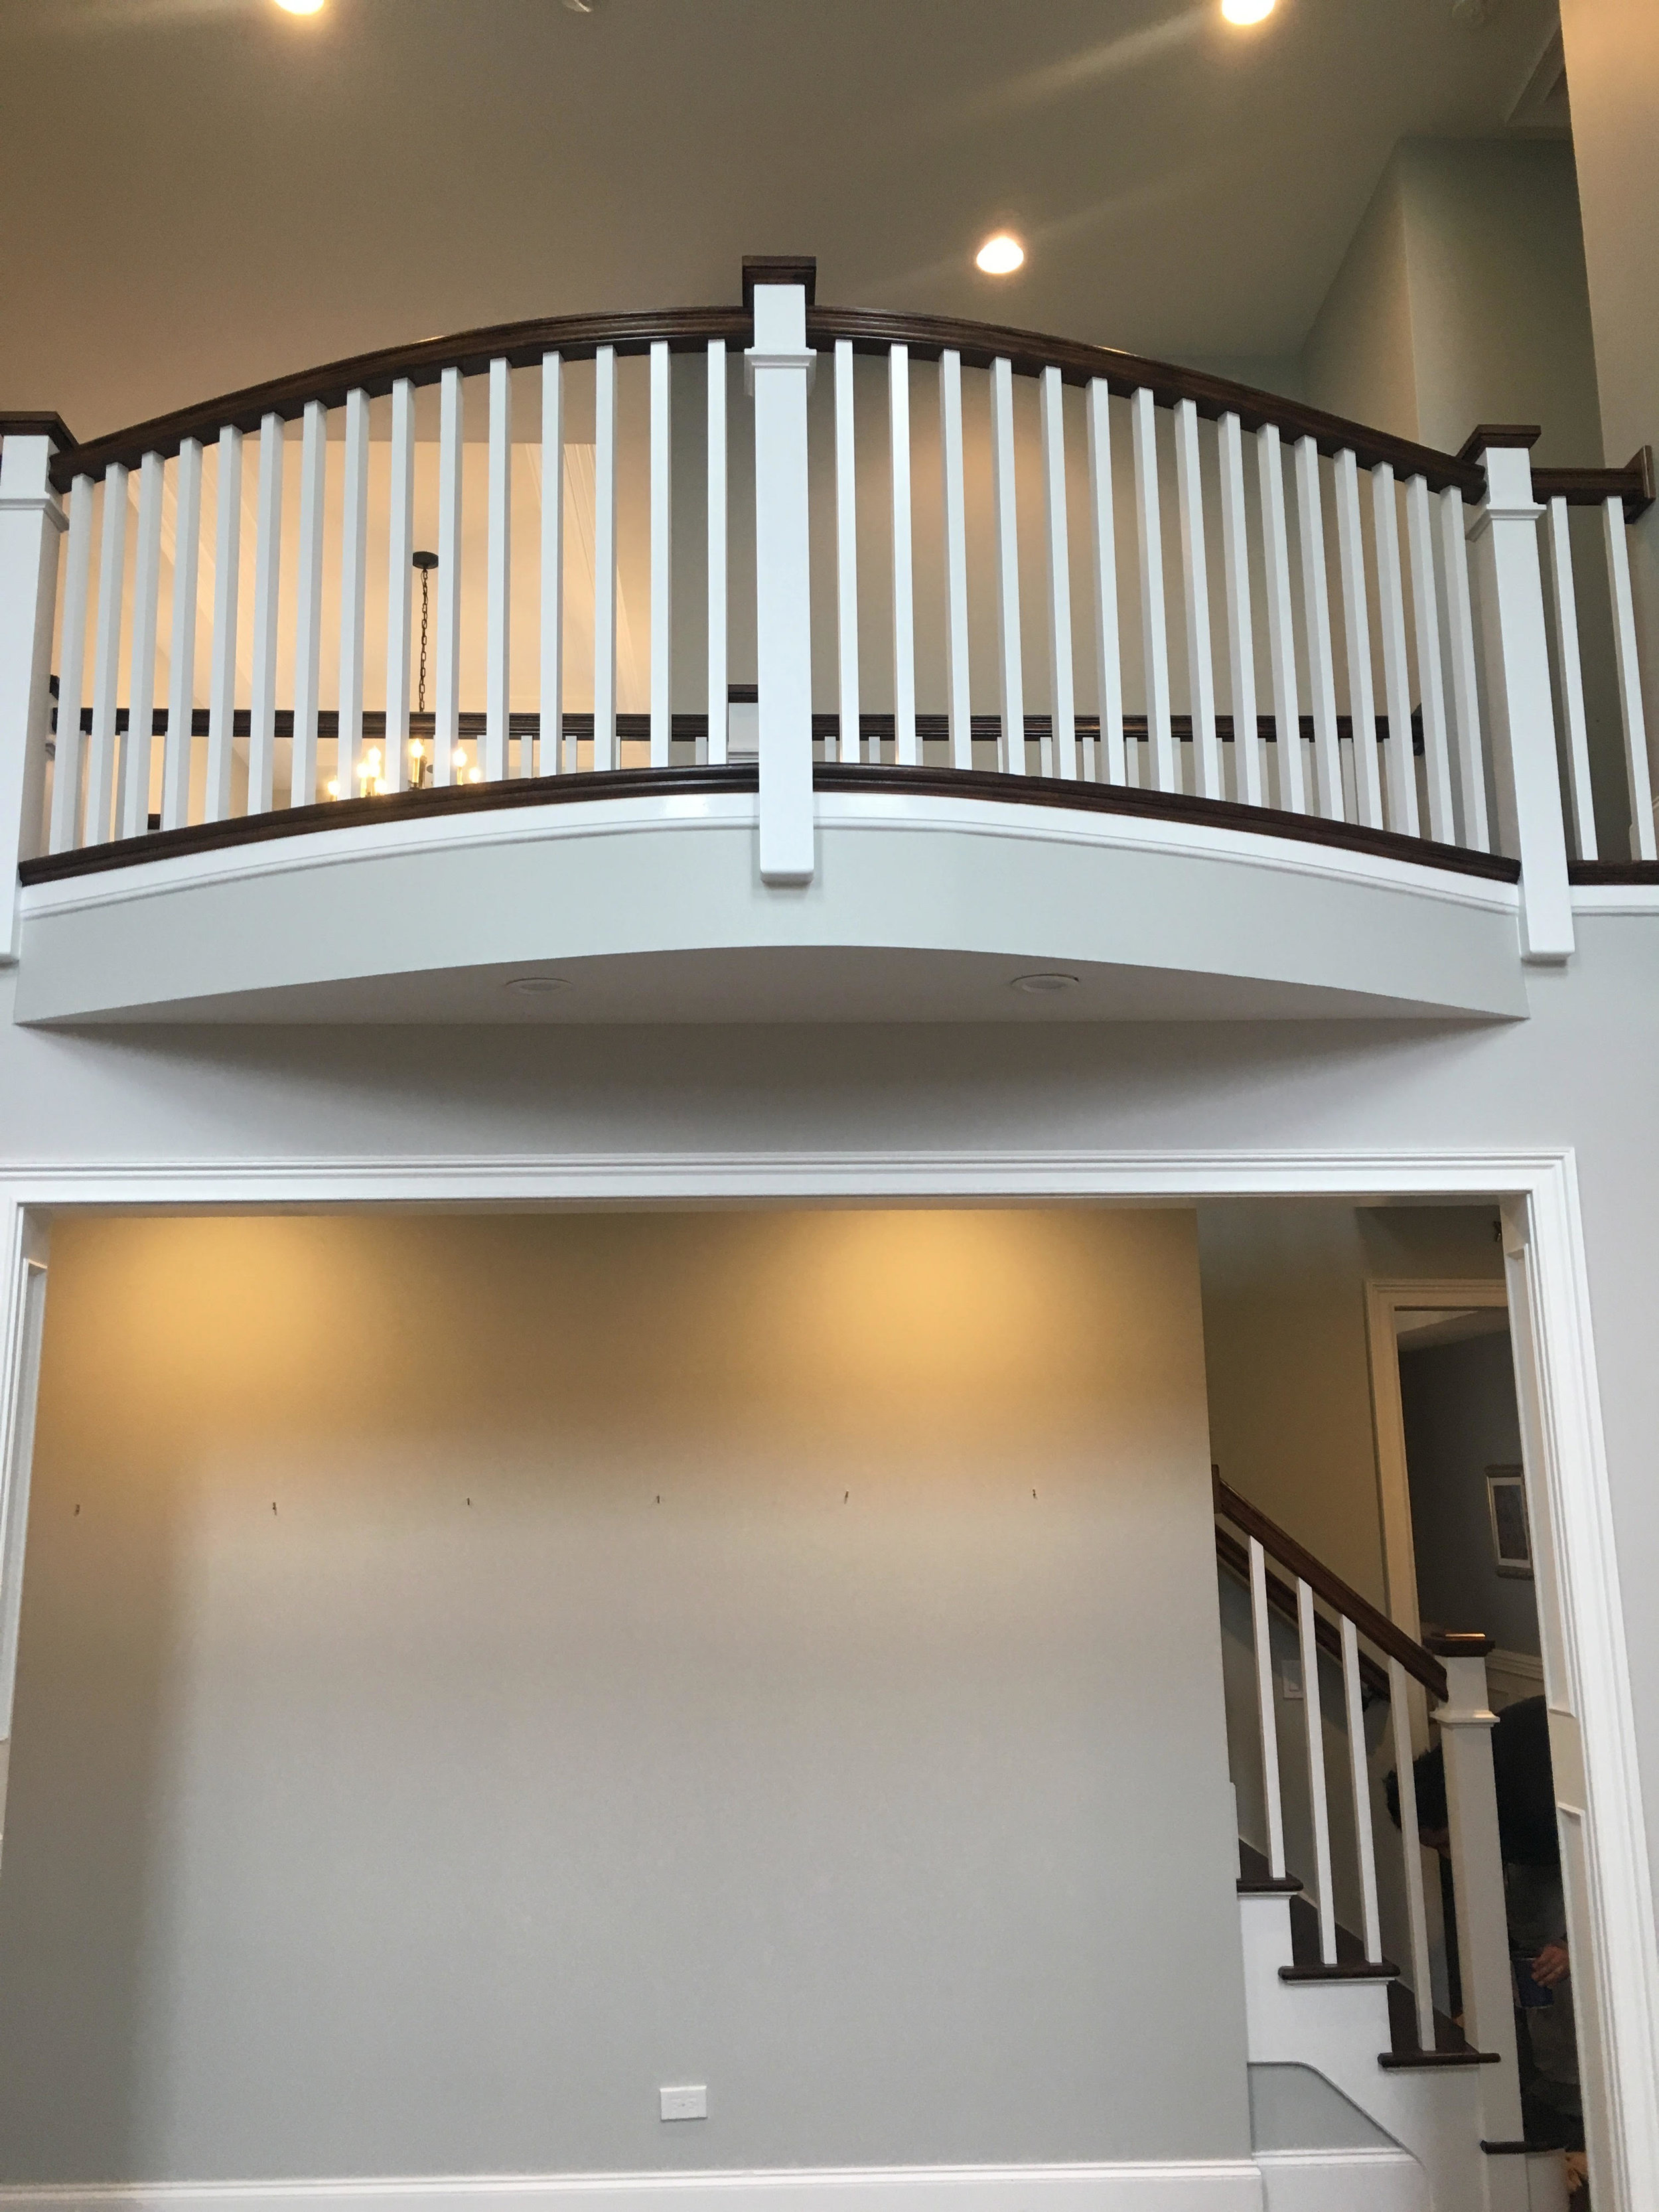 Second Floor Family Room Balcony Replacement in Northern Illinois